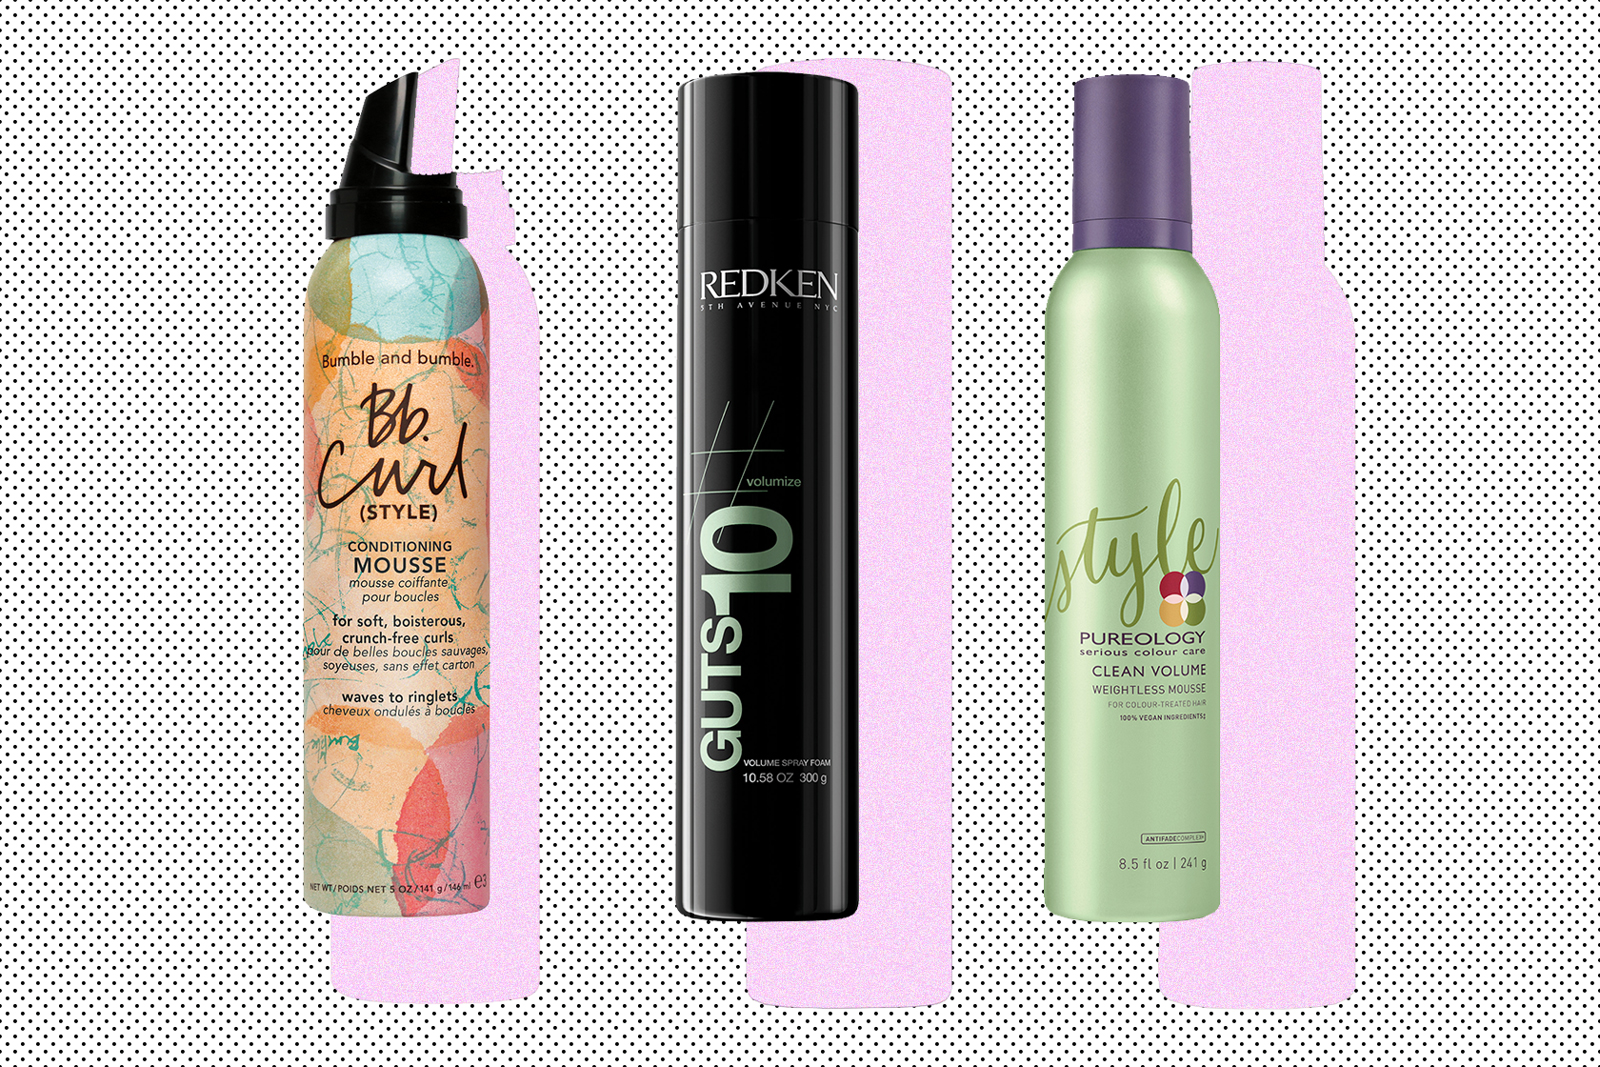 Best mousse for curly hair 2021: Add volume and tame frizz | The Independent